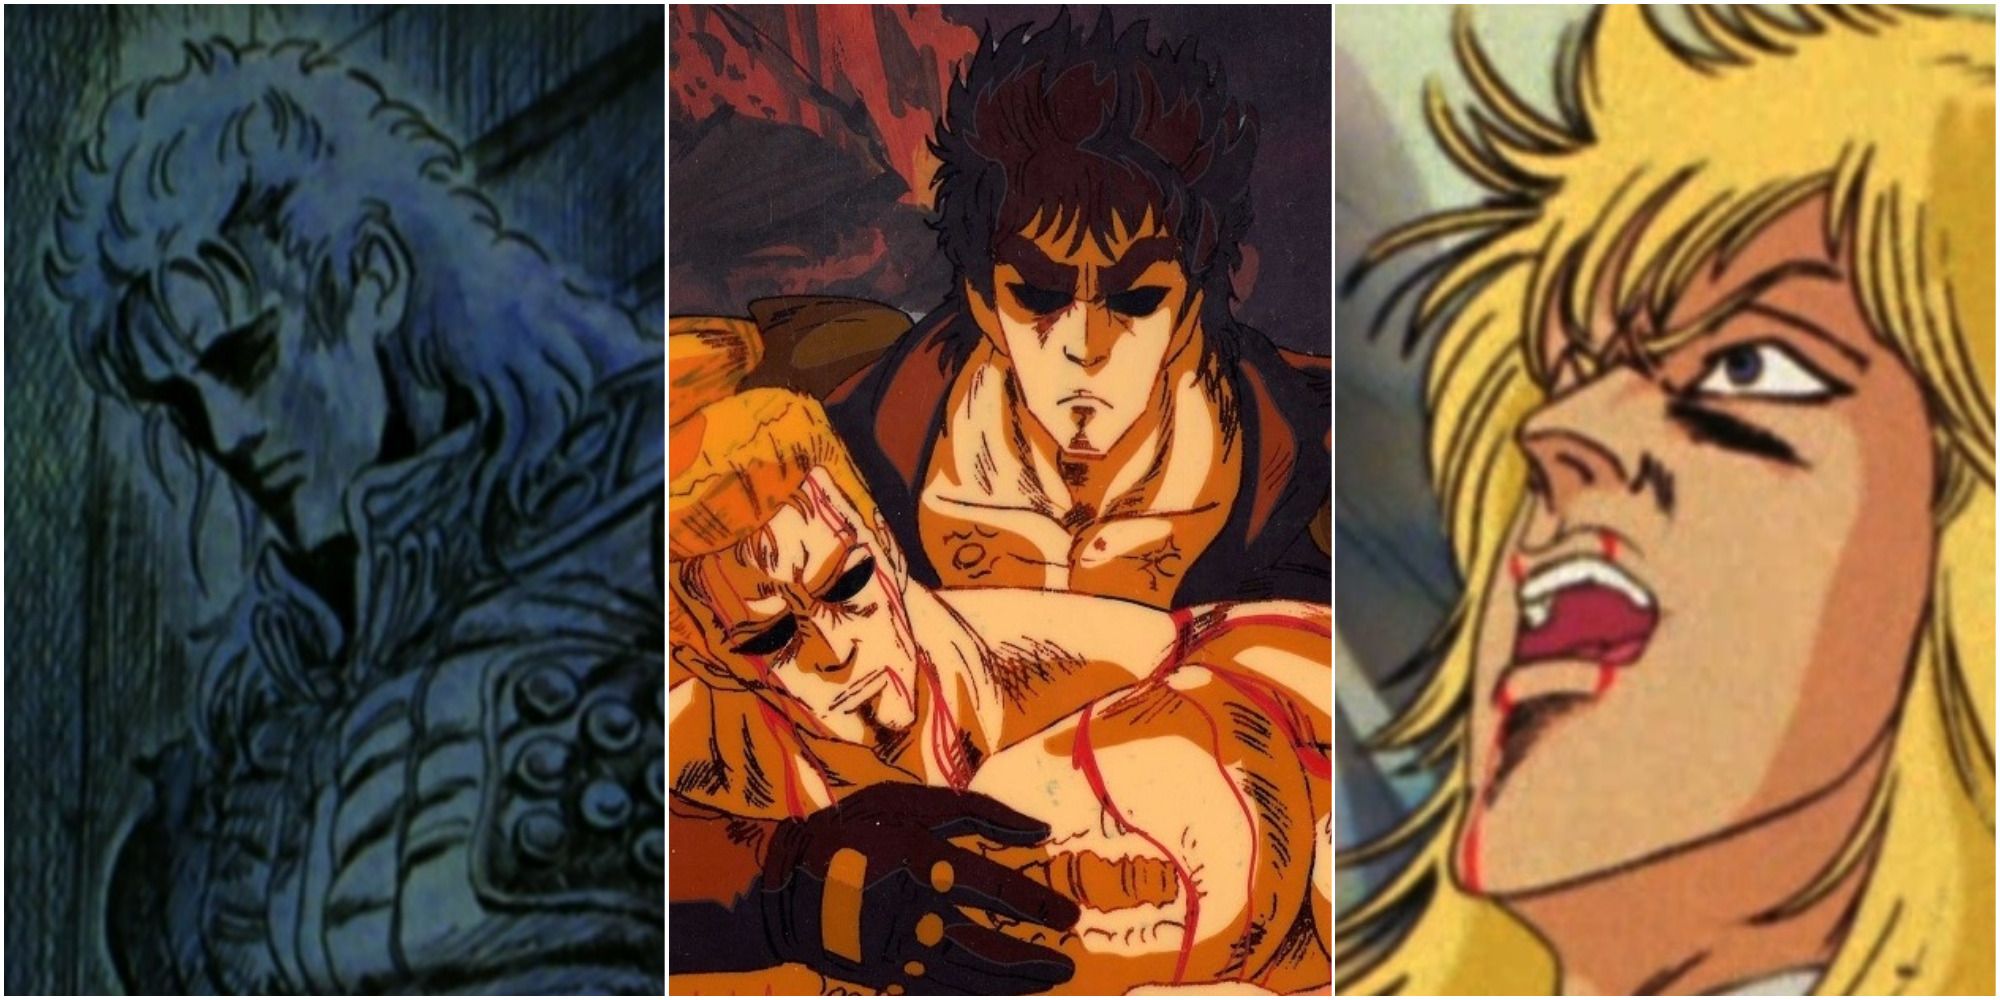 The Saddest Moments in Fist of the North Star